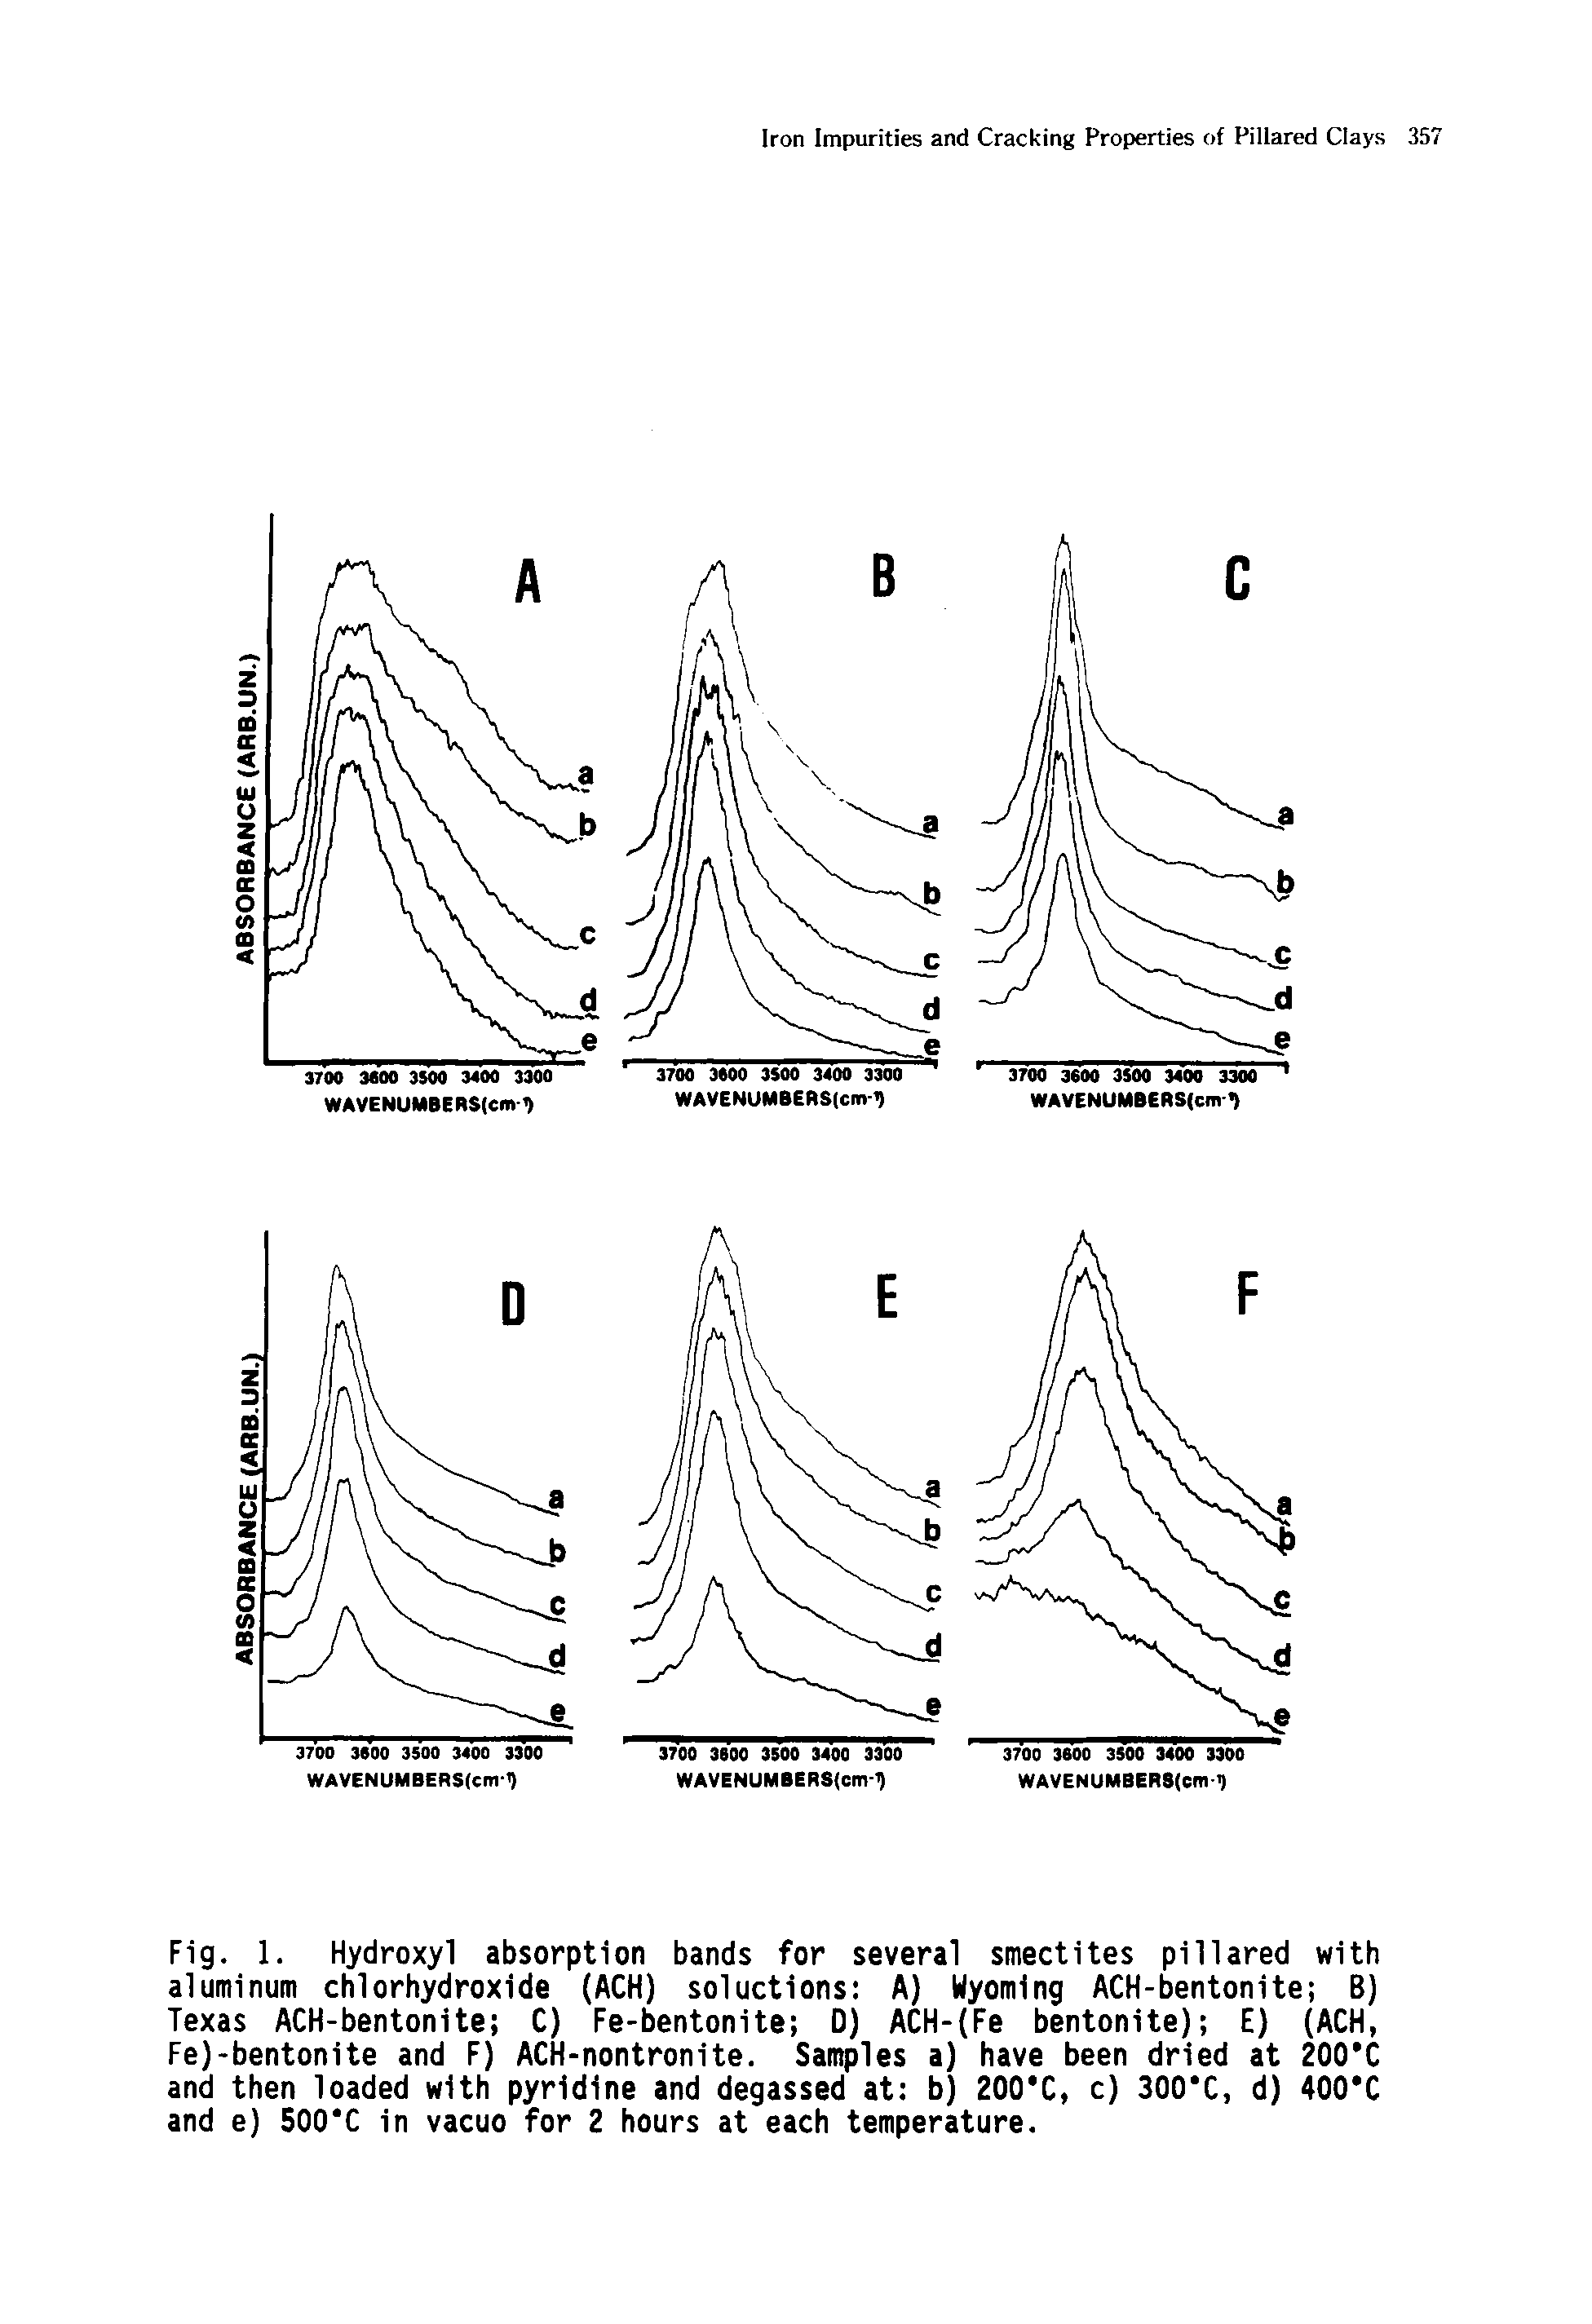 Fig. 1. Hydroxyl absorption bands for several smectites pillared with aluminum chlorhydroxide (ACH) soluctions A) Wyoming ACH-bentonite B) Texas ACH-bentonite C) Fe-bentonite D) ACH- Fe bentonite) E) (ACH, Fe)-bentonite and F) ACH-nontronite. Samples a) have been dried at 200 C and then loaded with pyridine and degassed at b) 200 C, c) 300 C, d) 400 C and e) 500 C in vacuo for 2 hours at each temperature.